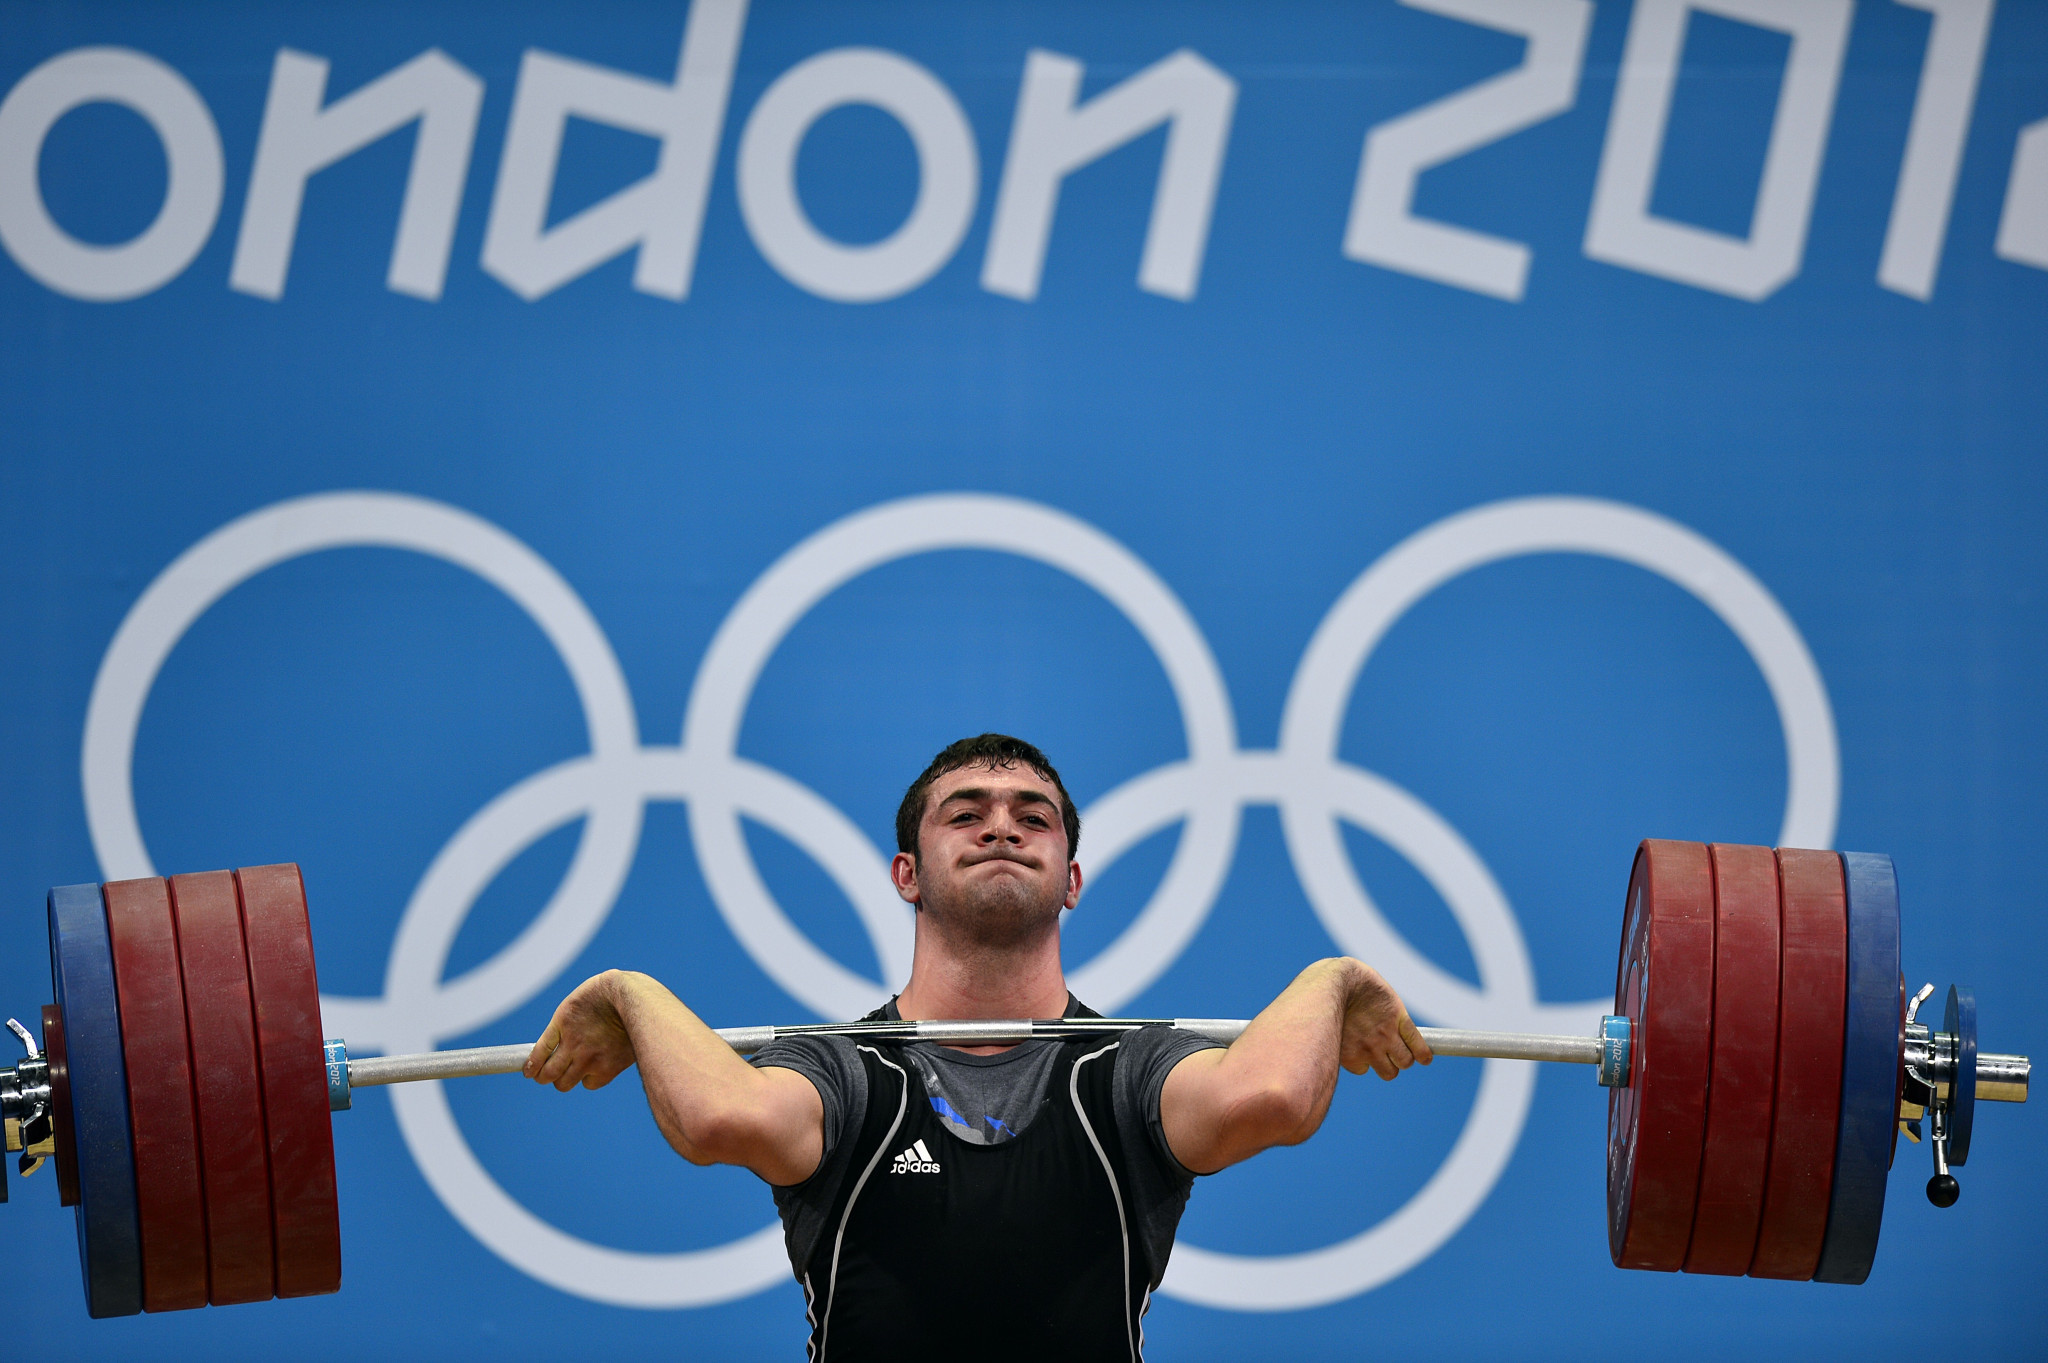 Saeid Mohammadpour was awarded the gold medal in 2012 having provisionally finished fifth in the 94kg final ©Getty Images